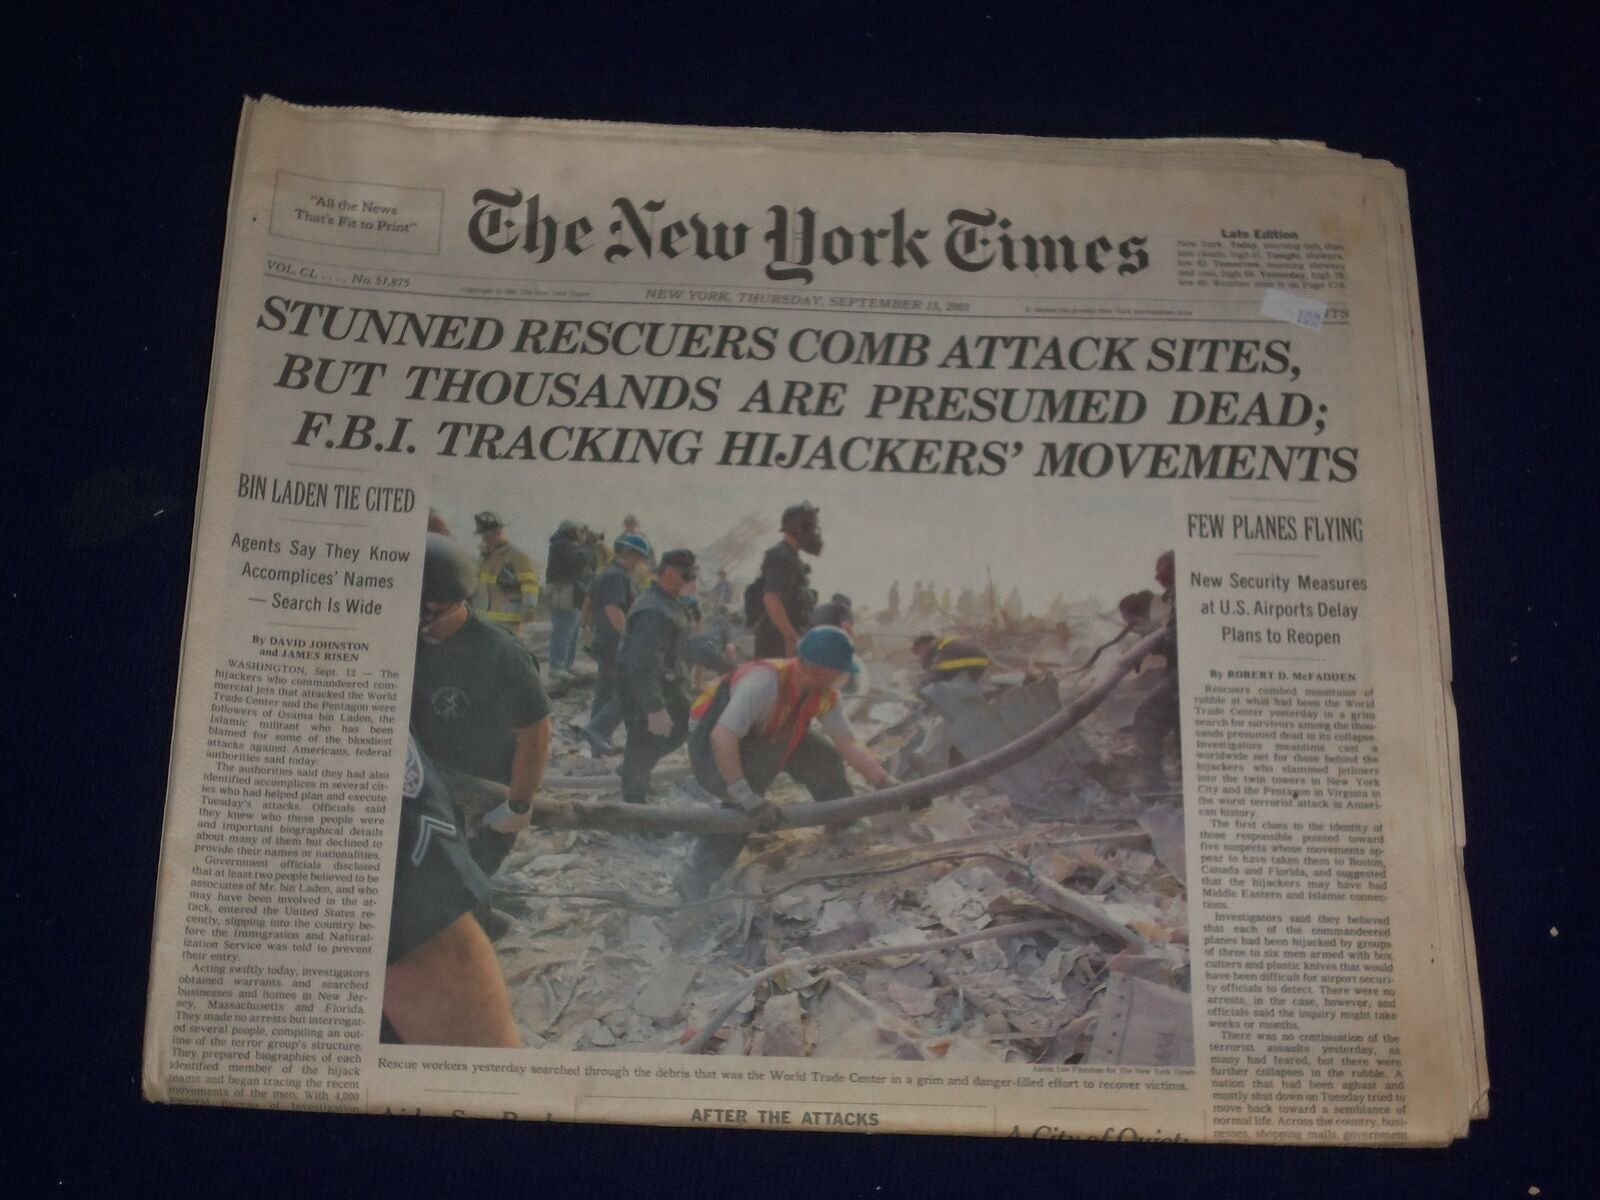 2001 SEPTEMBER 13 THE NEW YORK TIMES-STUNNED RESCUERS COMB ATTACK SITES- NP 3027